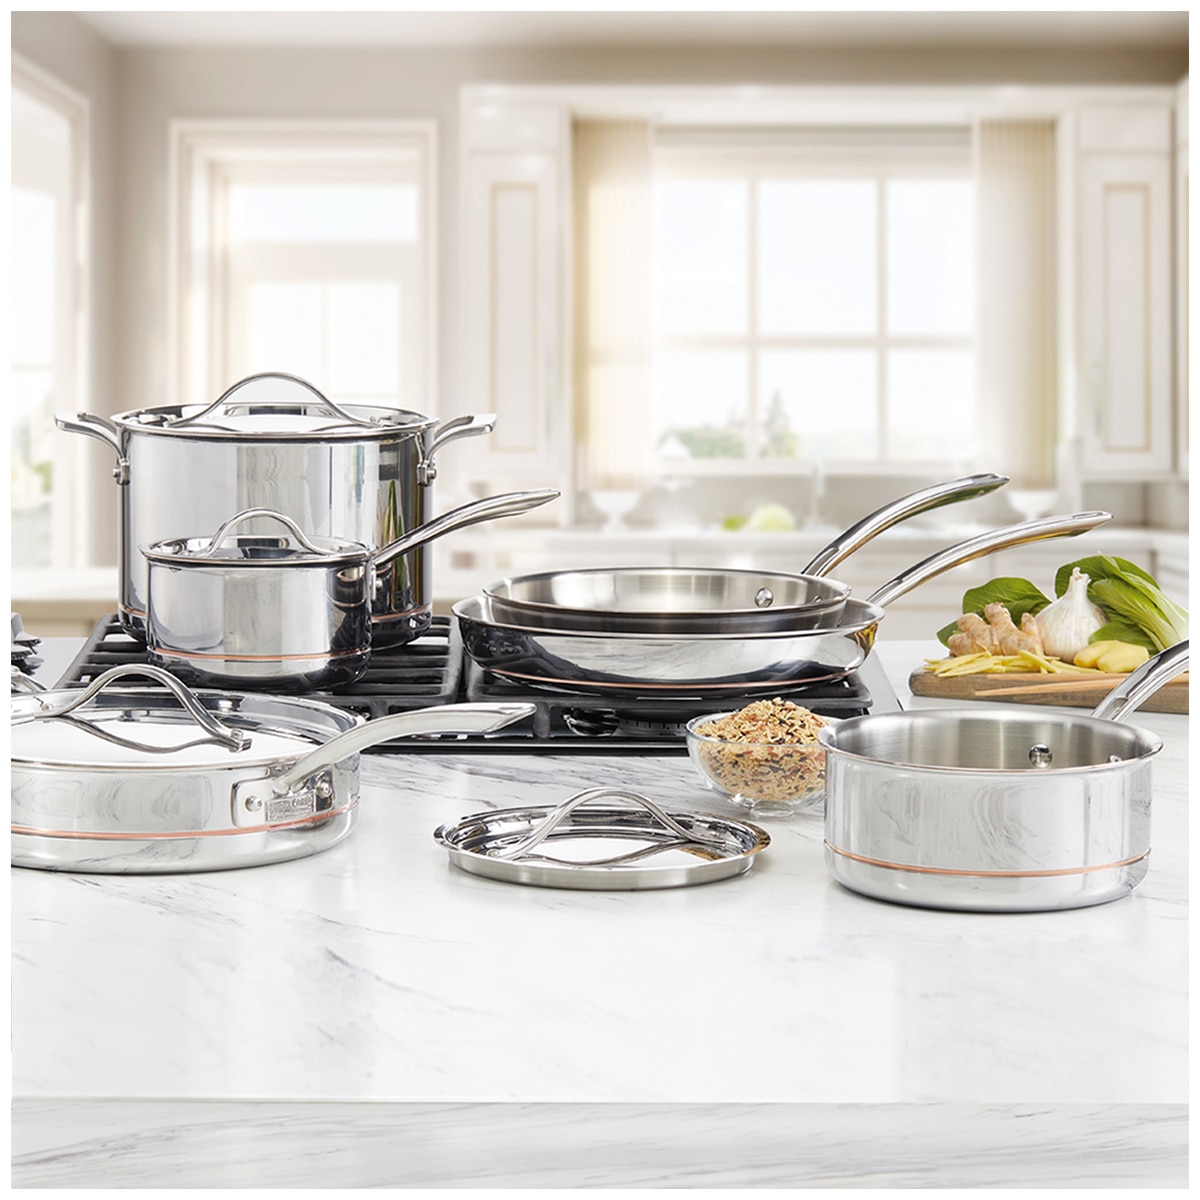 Kirkland Signature 10pc Stainless Steel Cookware Set | Costco Australia Stainless Steel Pots And Pans Set Costco